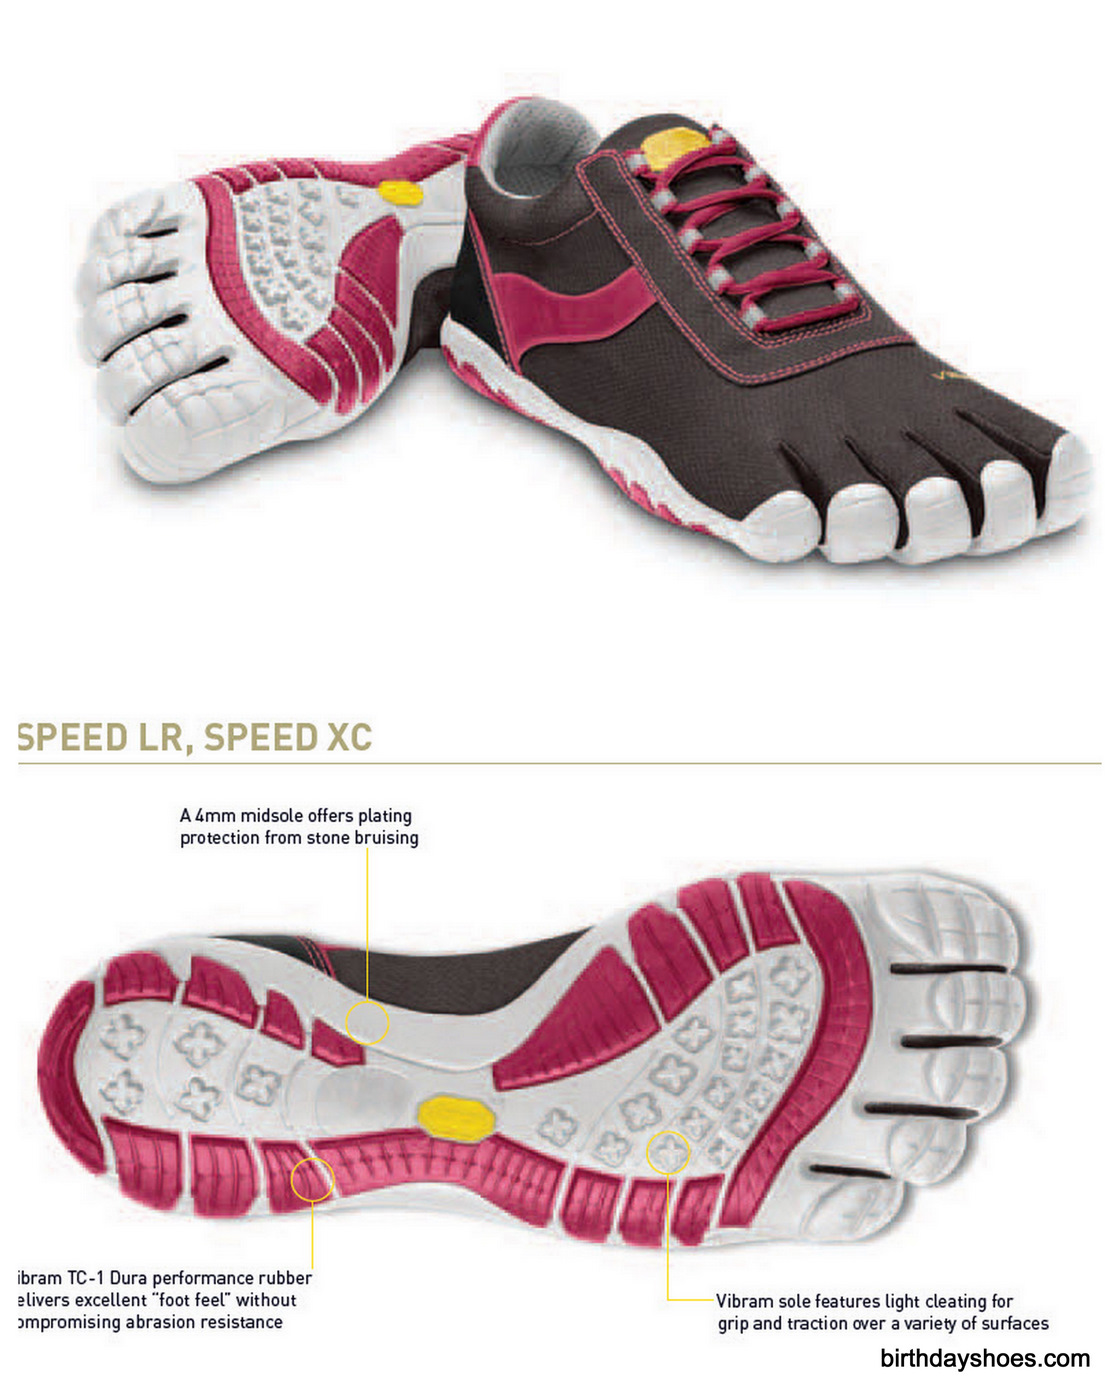 Above is a women's colorway of the Speed XC and information about the sole of the Speed XC and LR, which is built on the Trek platform.